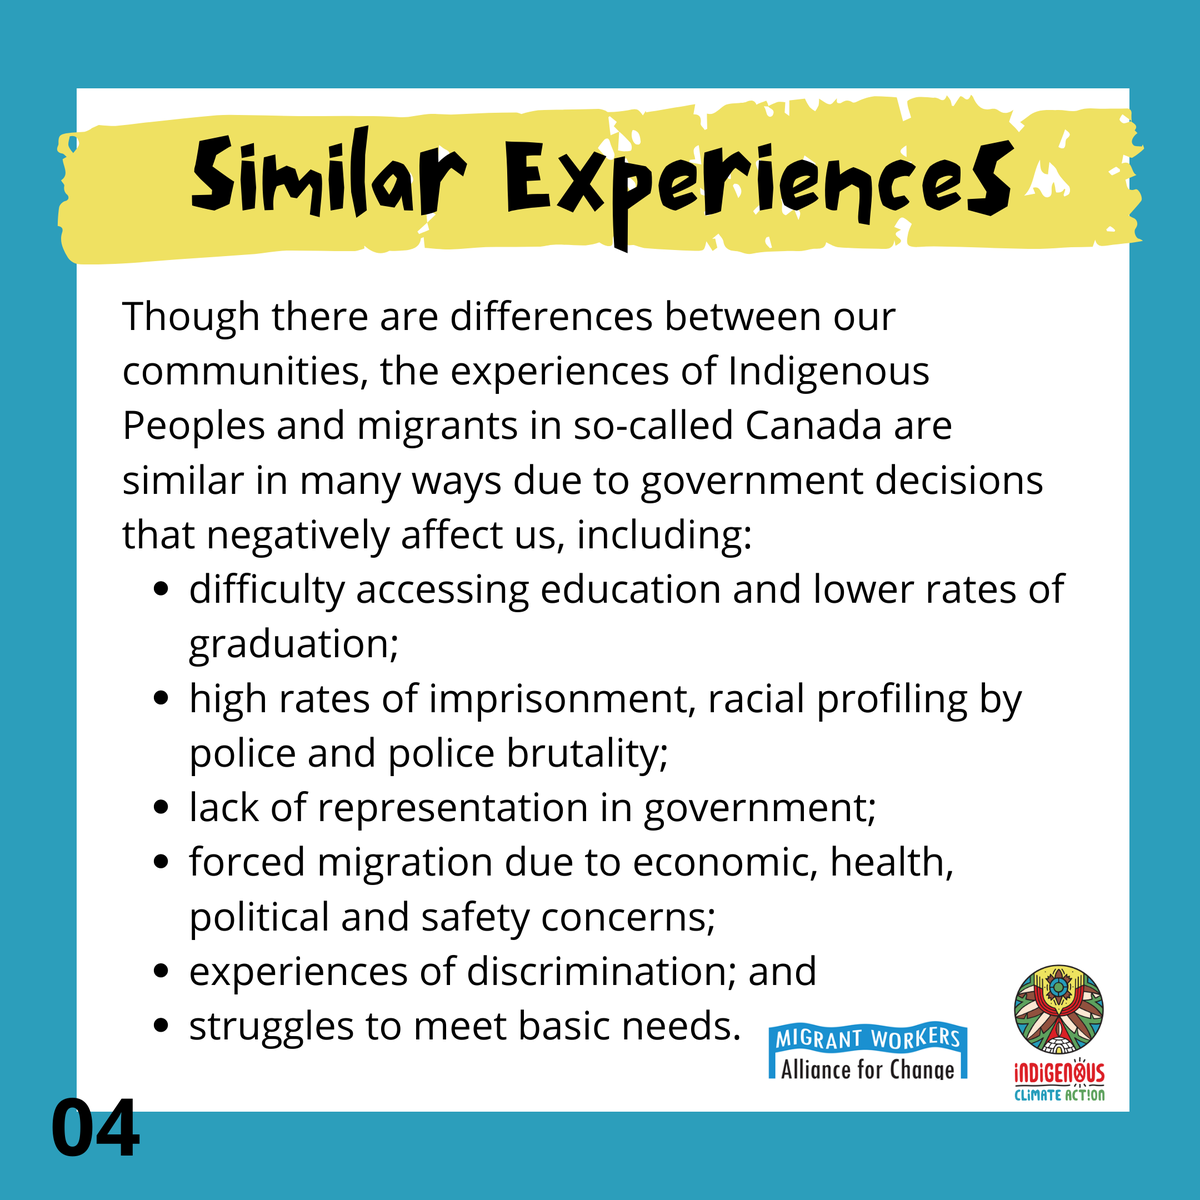 Though there are differences between our communities, the experiences of Indigenous Peoples and migrants in so-called Canada are similar in many ways due to government decisions that negatively affect us (4/9)